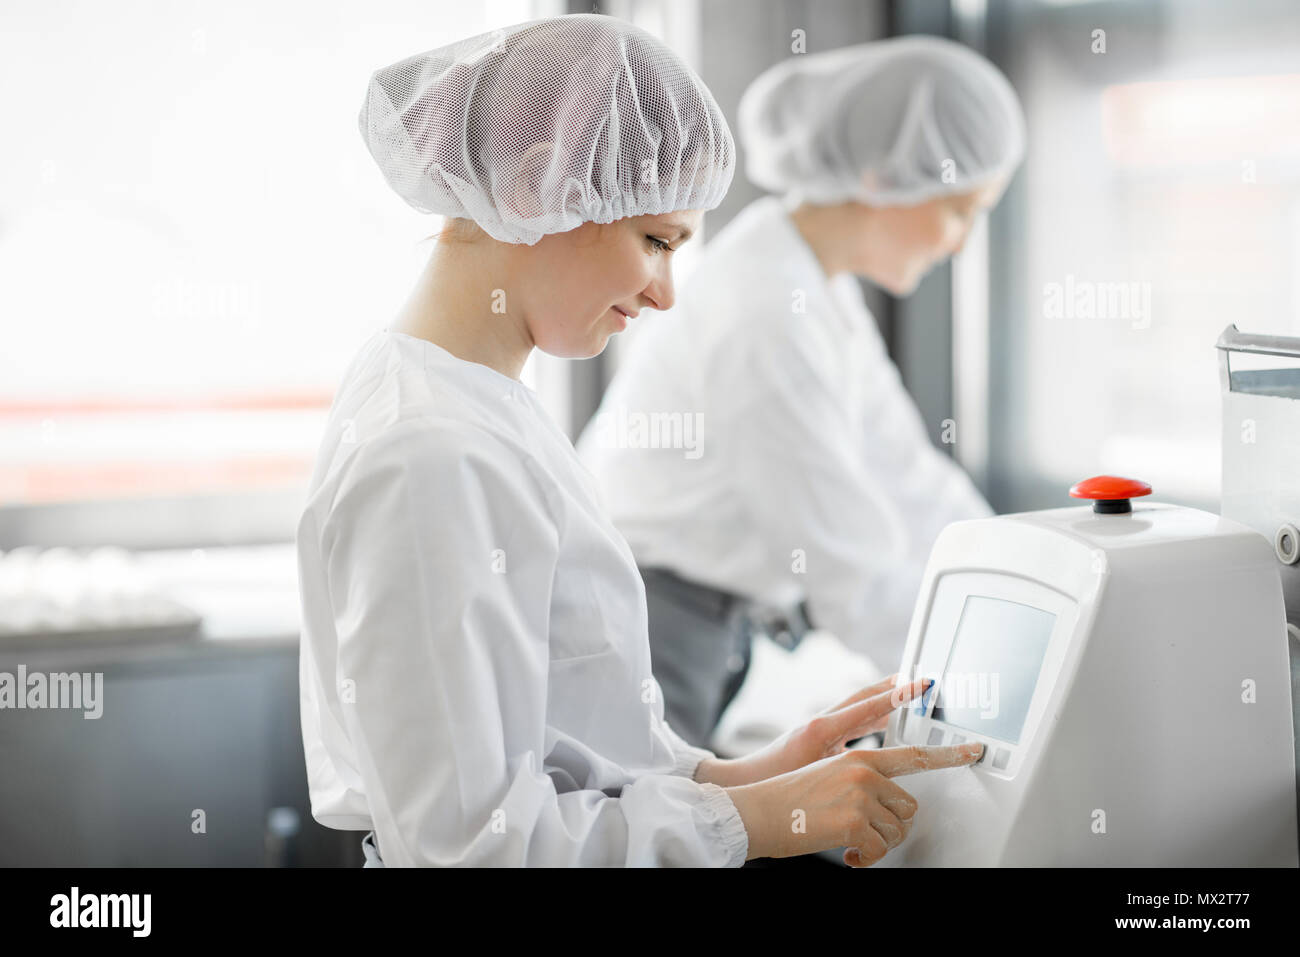 Women rolling dough at the manufacturing Stock Photo